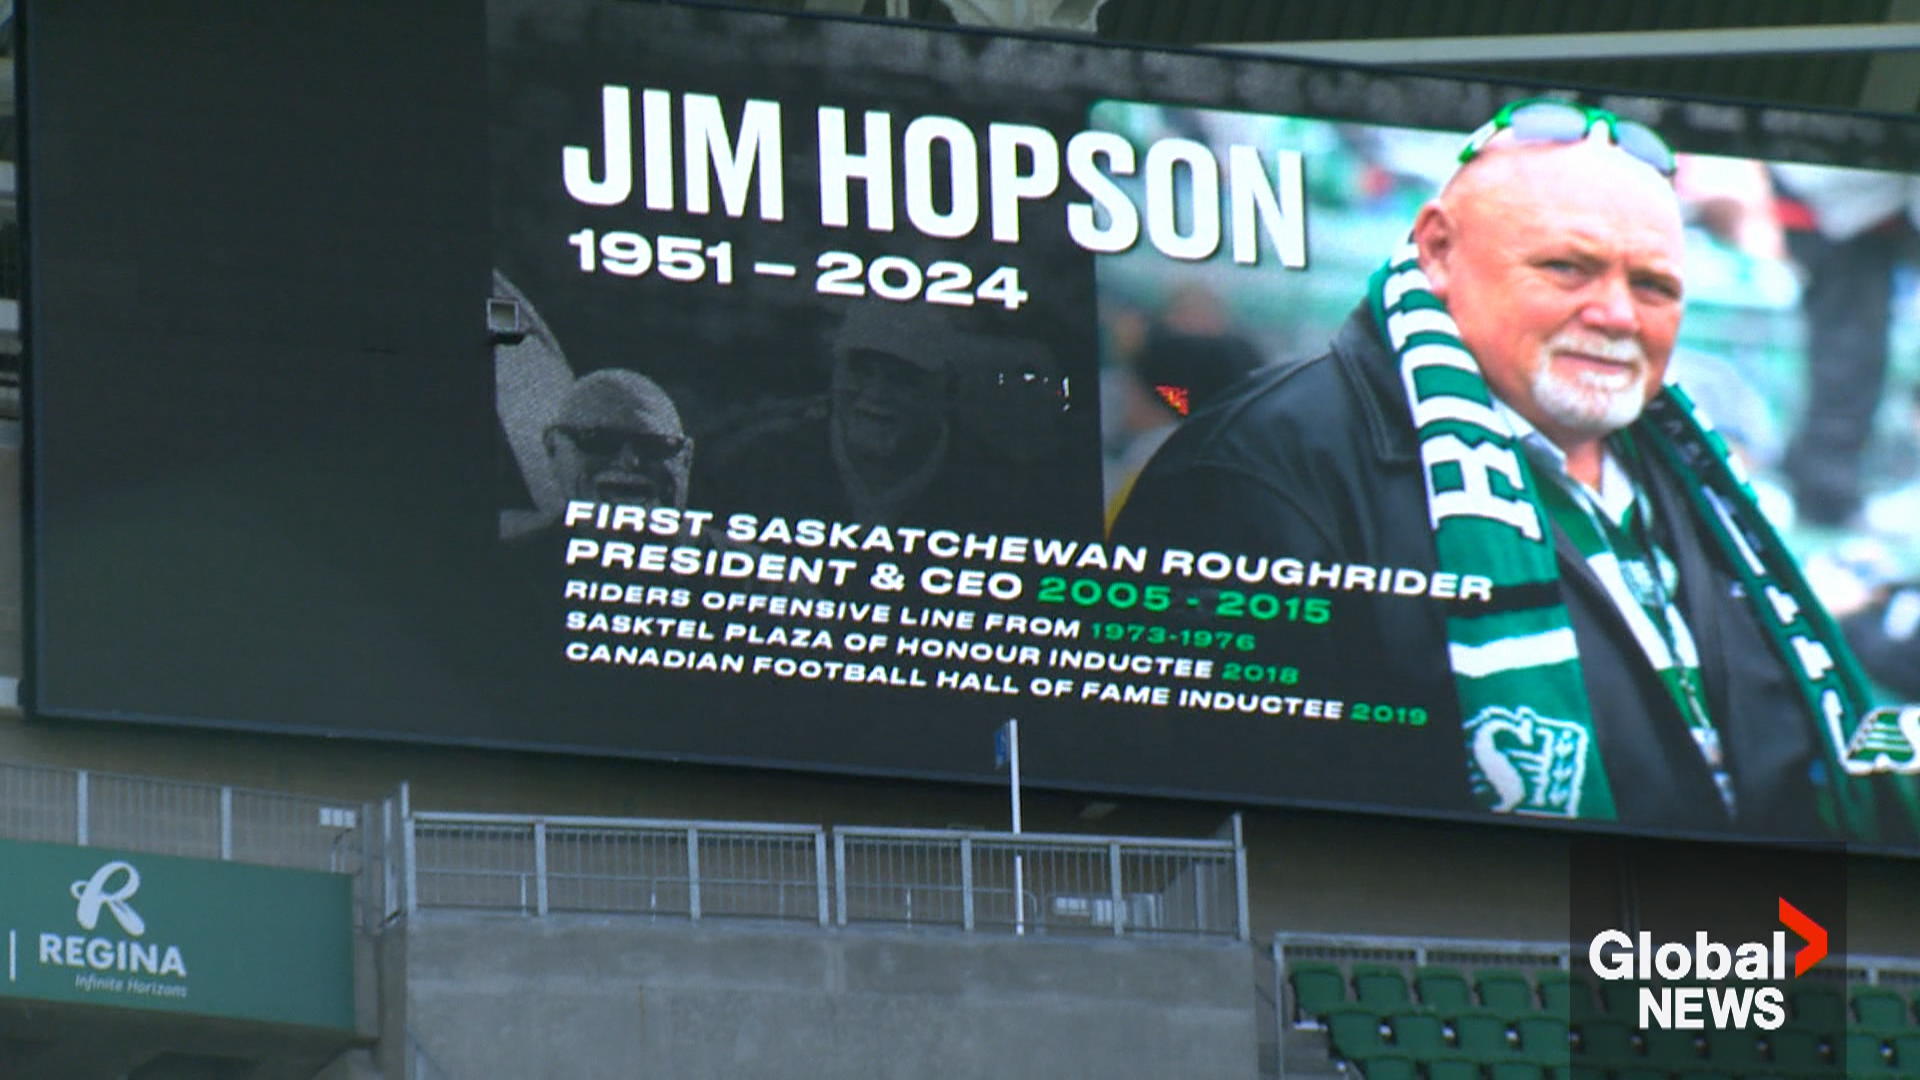 Family, friends to gather to celebrate life of football legend Jim Hopson